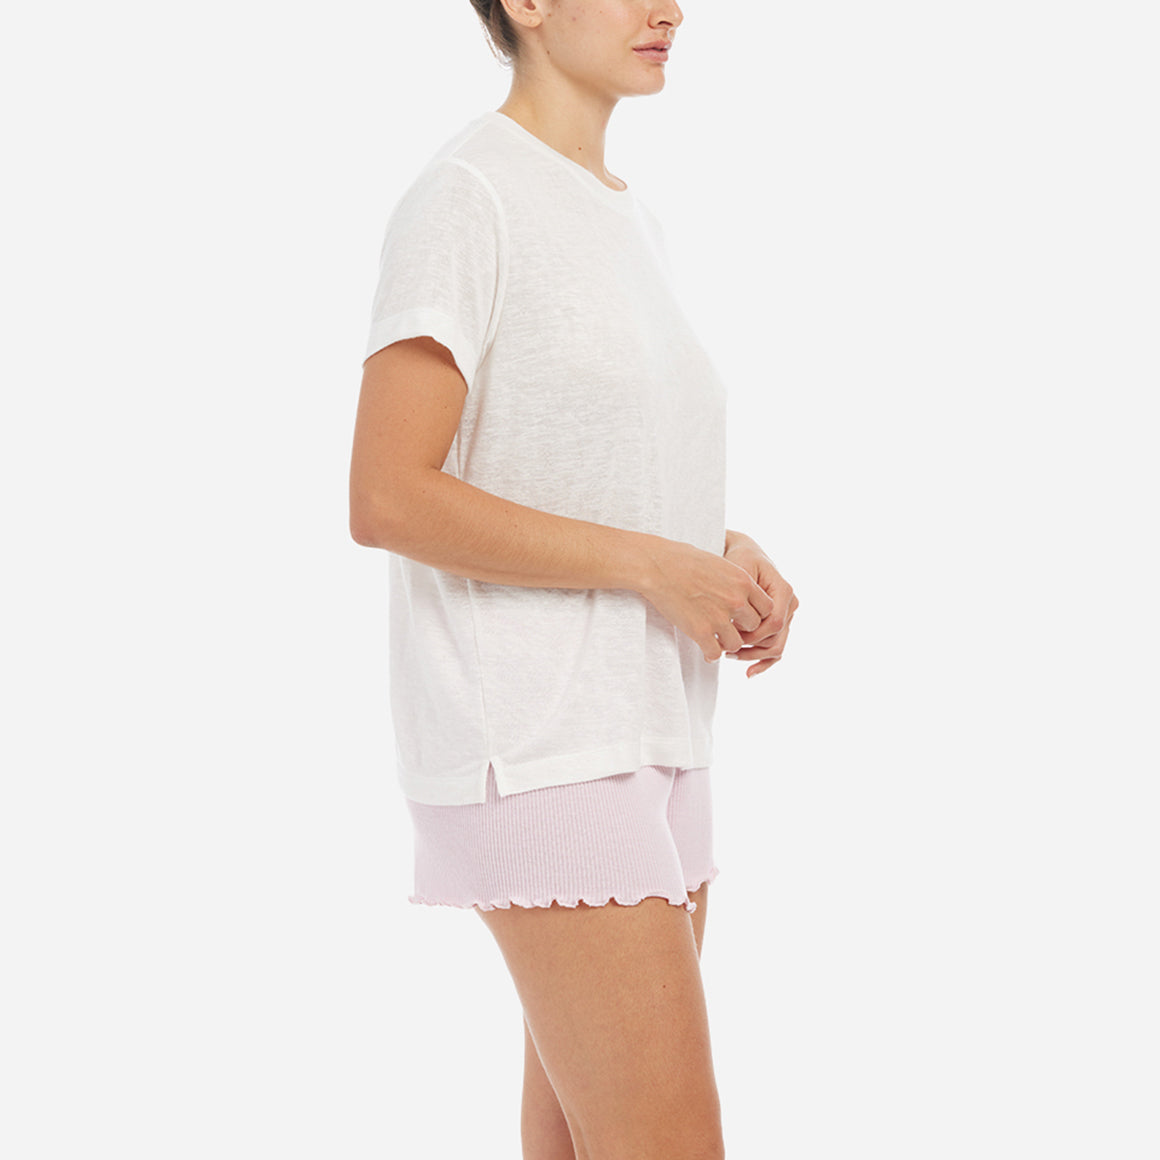 Crafted from the finest modal jersey slub, this t-shirt feels sumptuously soft and lightweight against your skin. The breathable fabric ensures optimal airflow, keeping you cool and comfortable throughout the night or during cozy lounging sessions at home. This t-shirt has relaxed-fit and features a flattering crew neckline perfect for sleep or play.